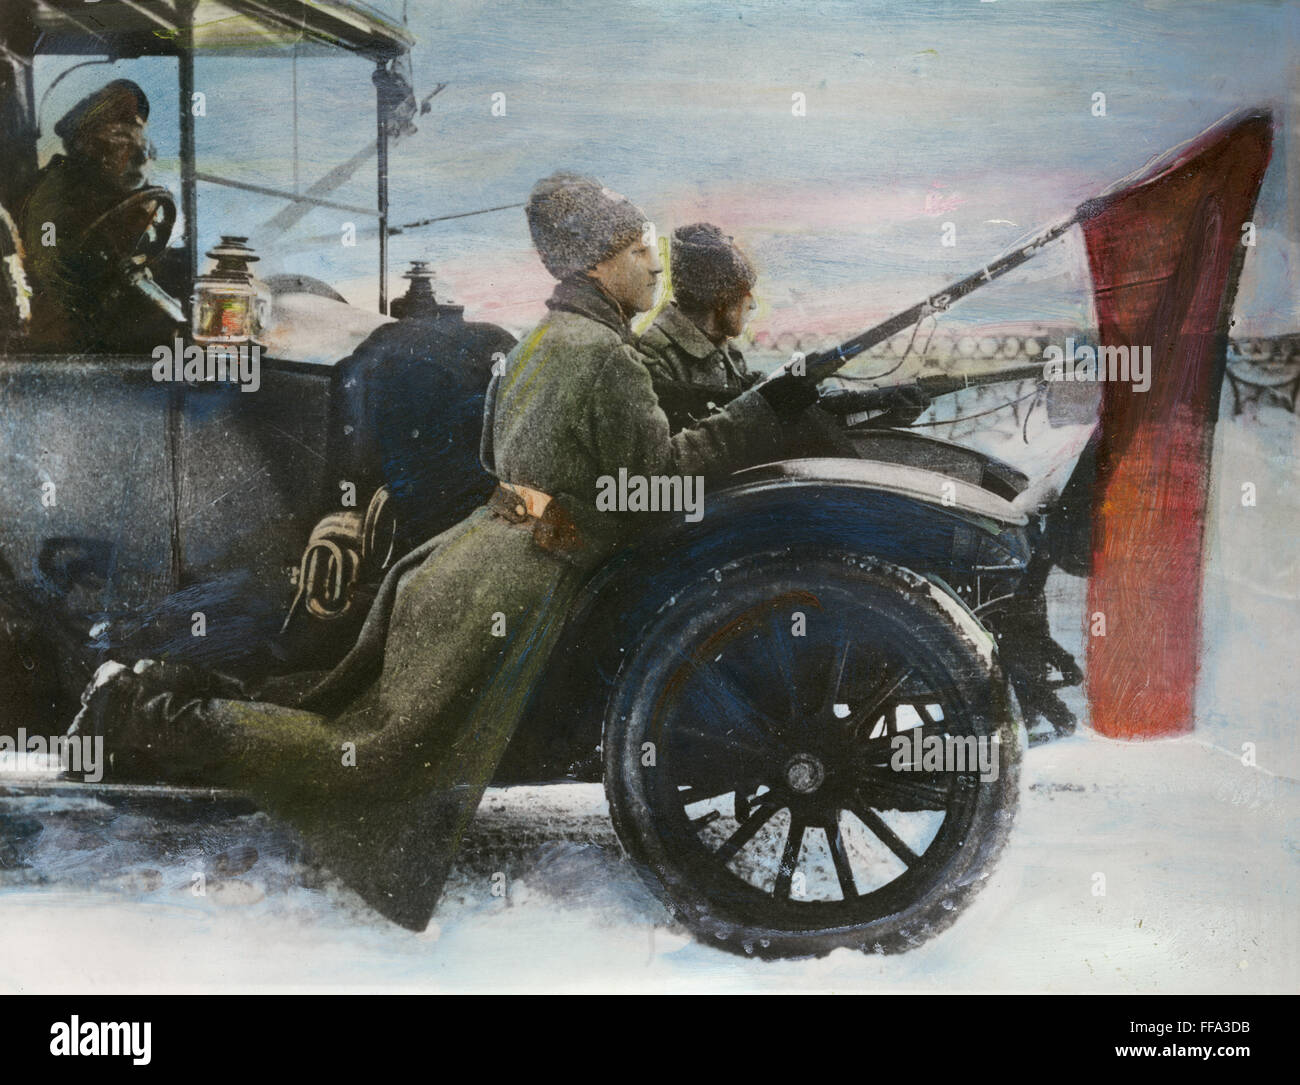 RUSSIAN REVOLUTION, 1917. /nPro-Bolshevik soldiers, with red flags fixed to their bayonets, patrolling the streets of Petrograd in March, 1917, from a car commandeered from the Provisional Government. Stock Photo